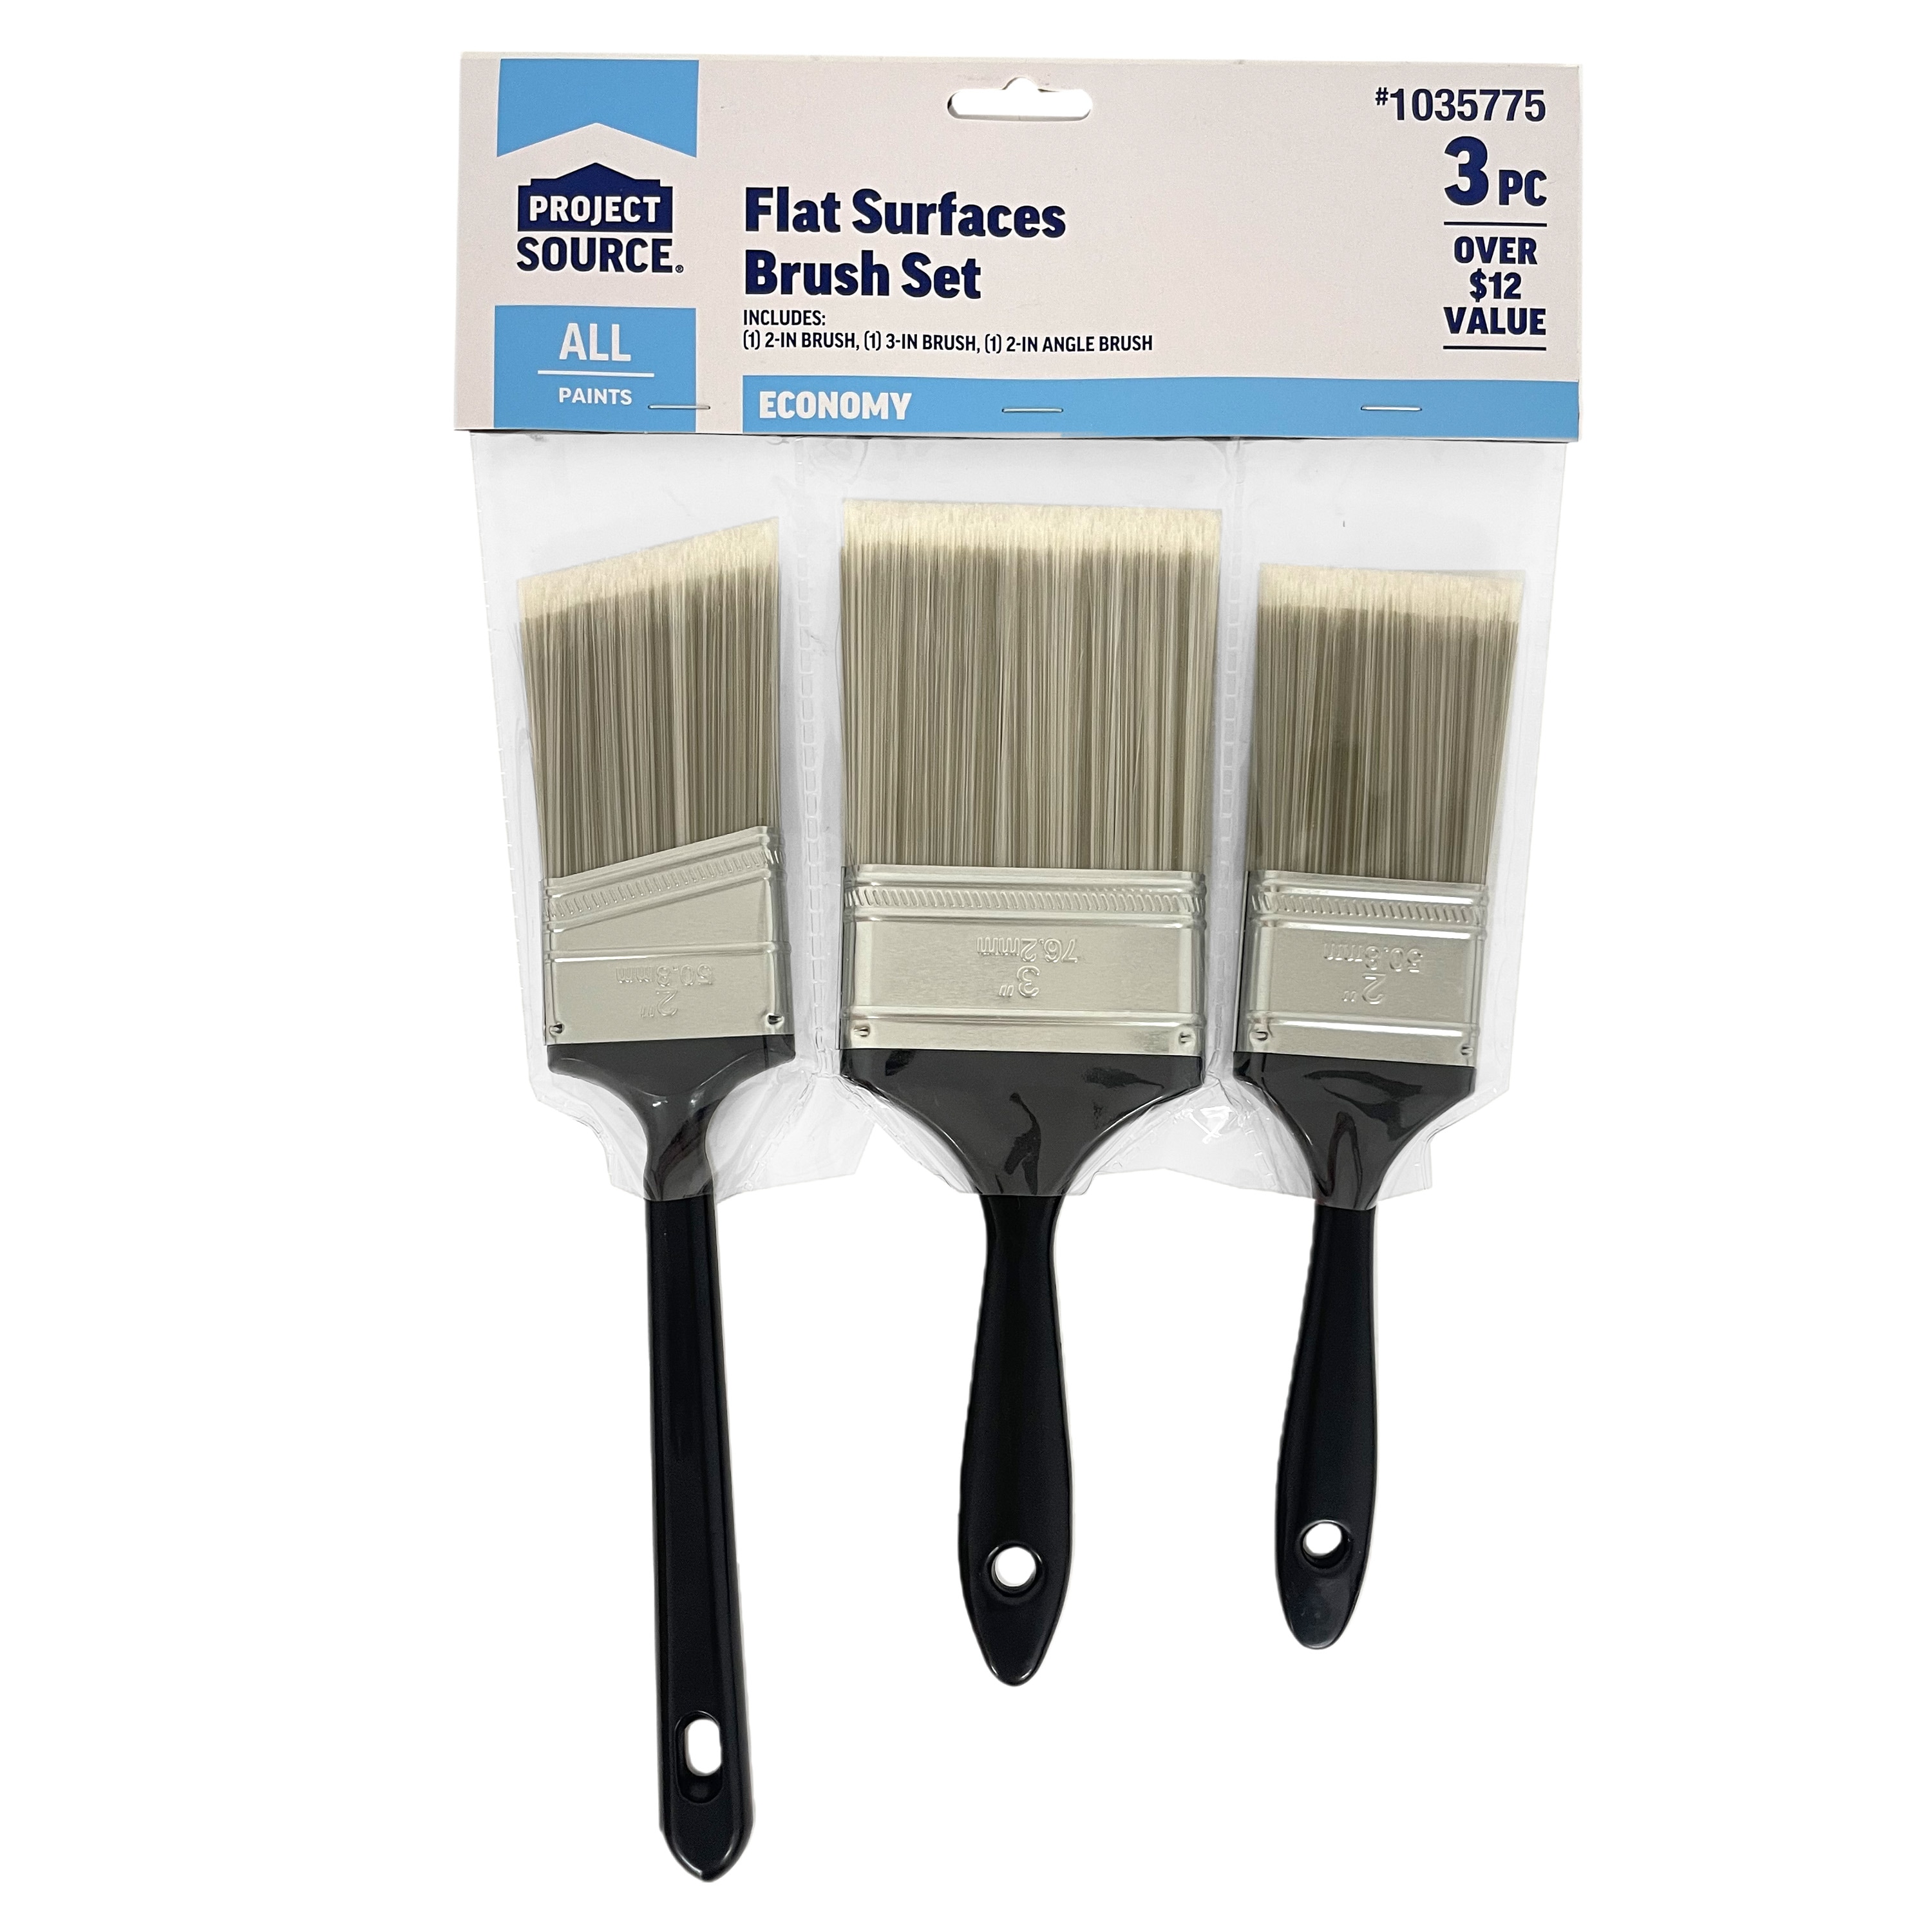 Touch Up Paint Brushes, House Painting Brush for Wall, Trim, Edge, Home Improvement, Premium, As Seen on Shark Tank Products, Pack of 2